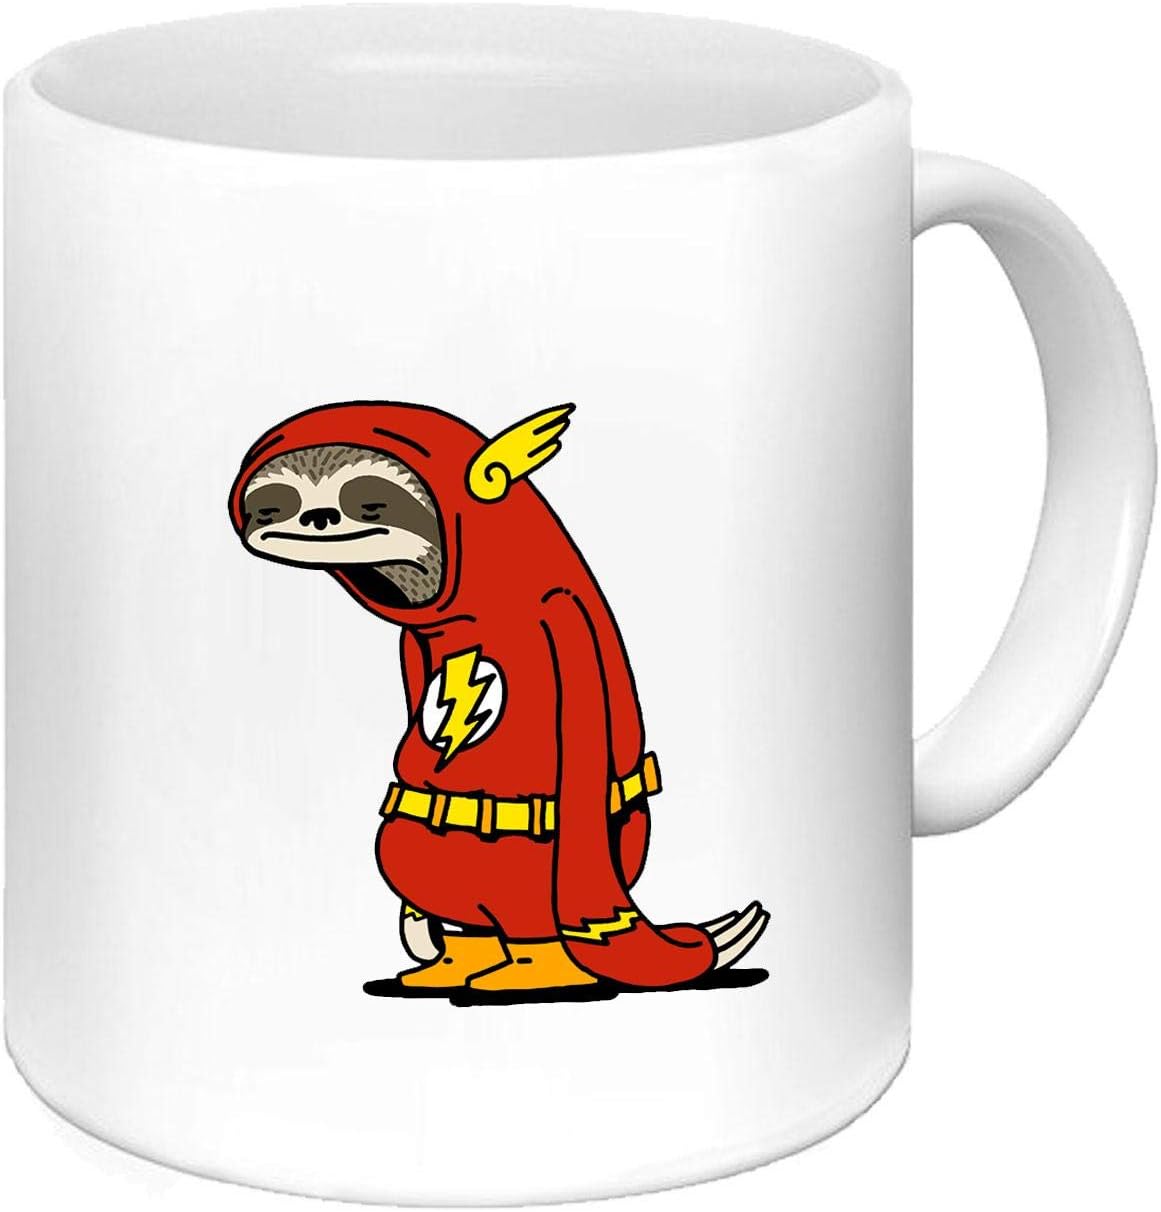 Mug-sloth fast hero funny nice gift for mom, dad, colleagues, friends in ceramic for breakfast, coffee or tea